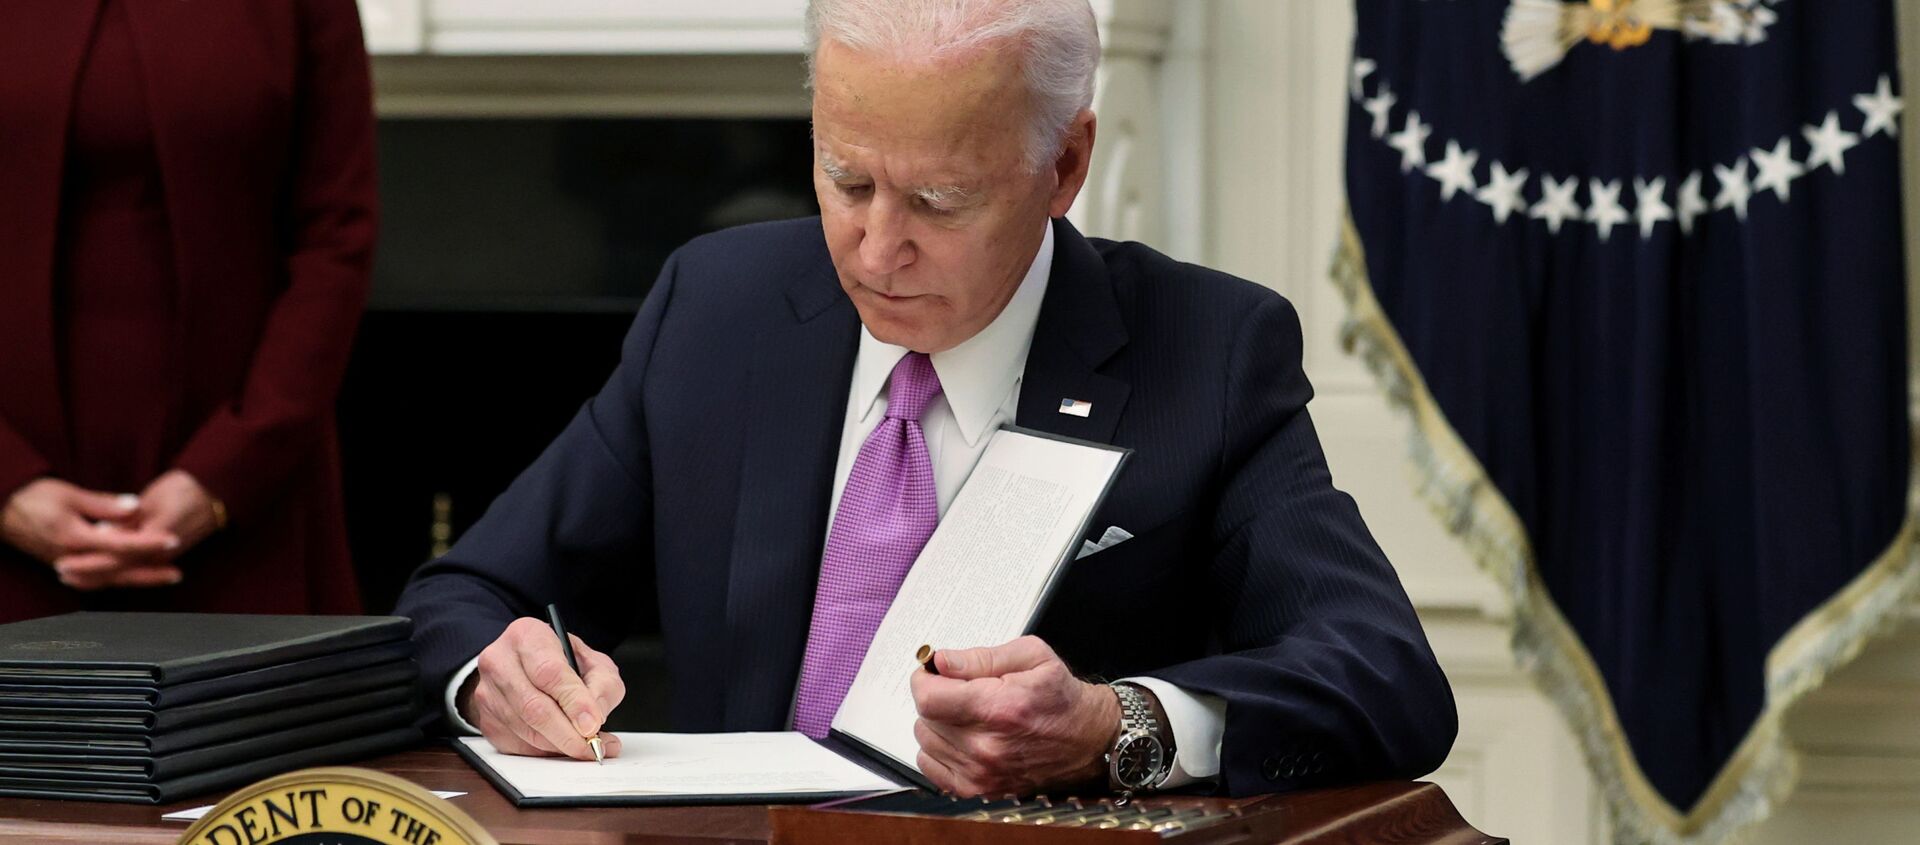 U.S. President Joe Biden signs an executive order as part of his administration's plans to fight the coronavirus disease (COVID-19) pandemic during a COVID-19 response event at the White House in Washington, 21 January 2021. - Sputnik International, 1920, 30.01.2021